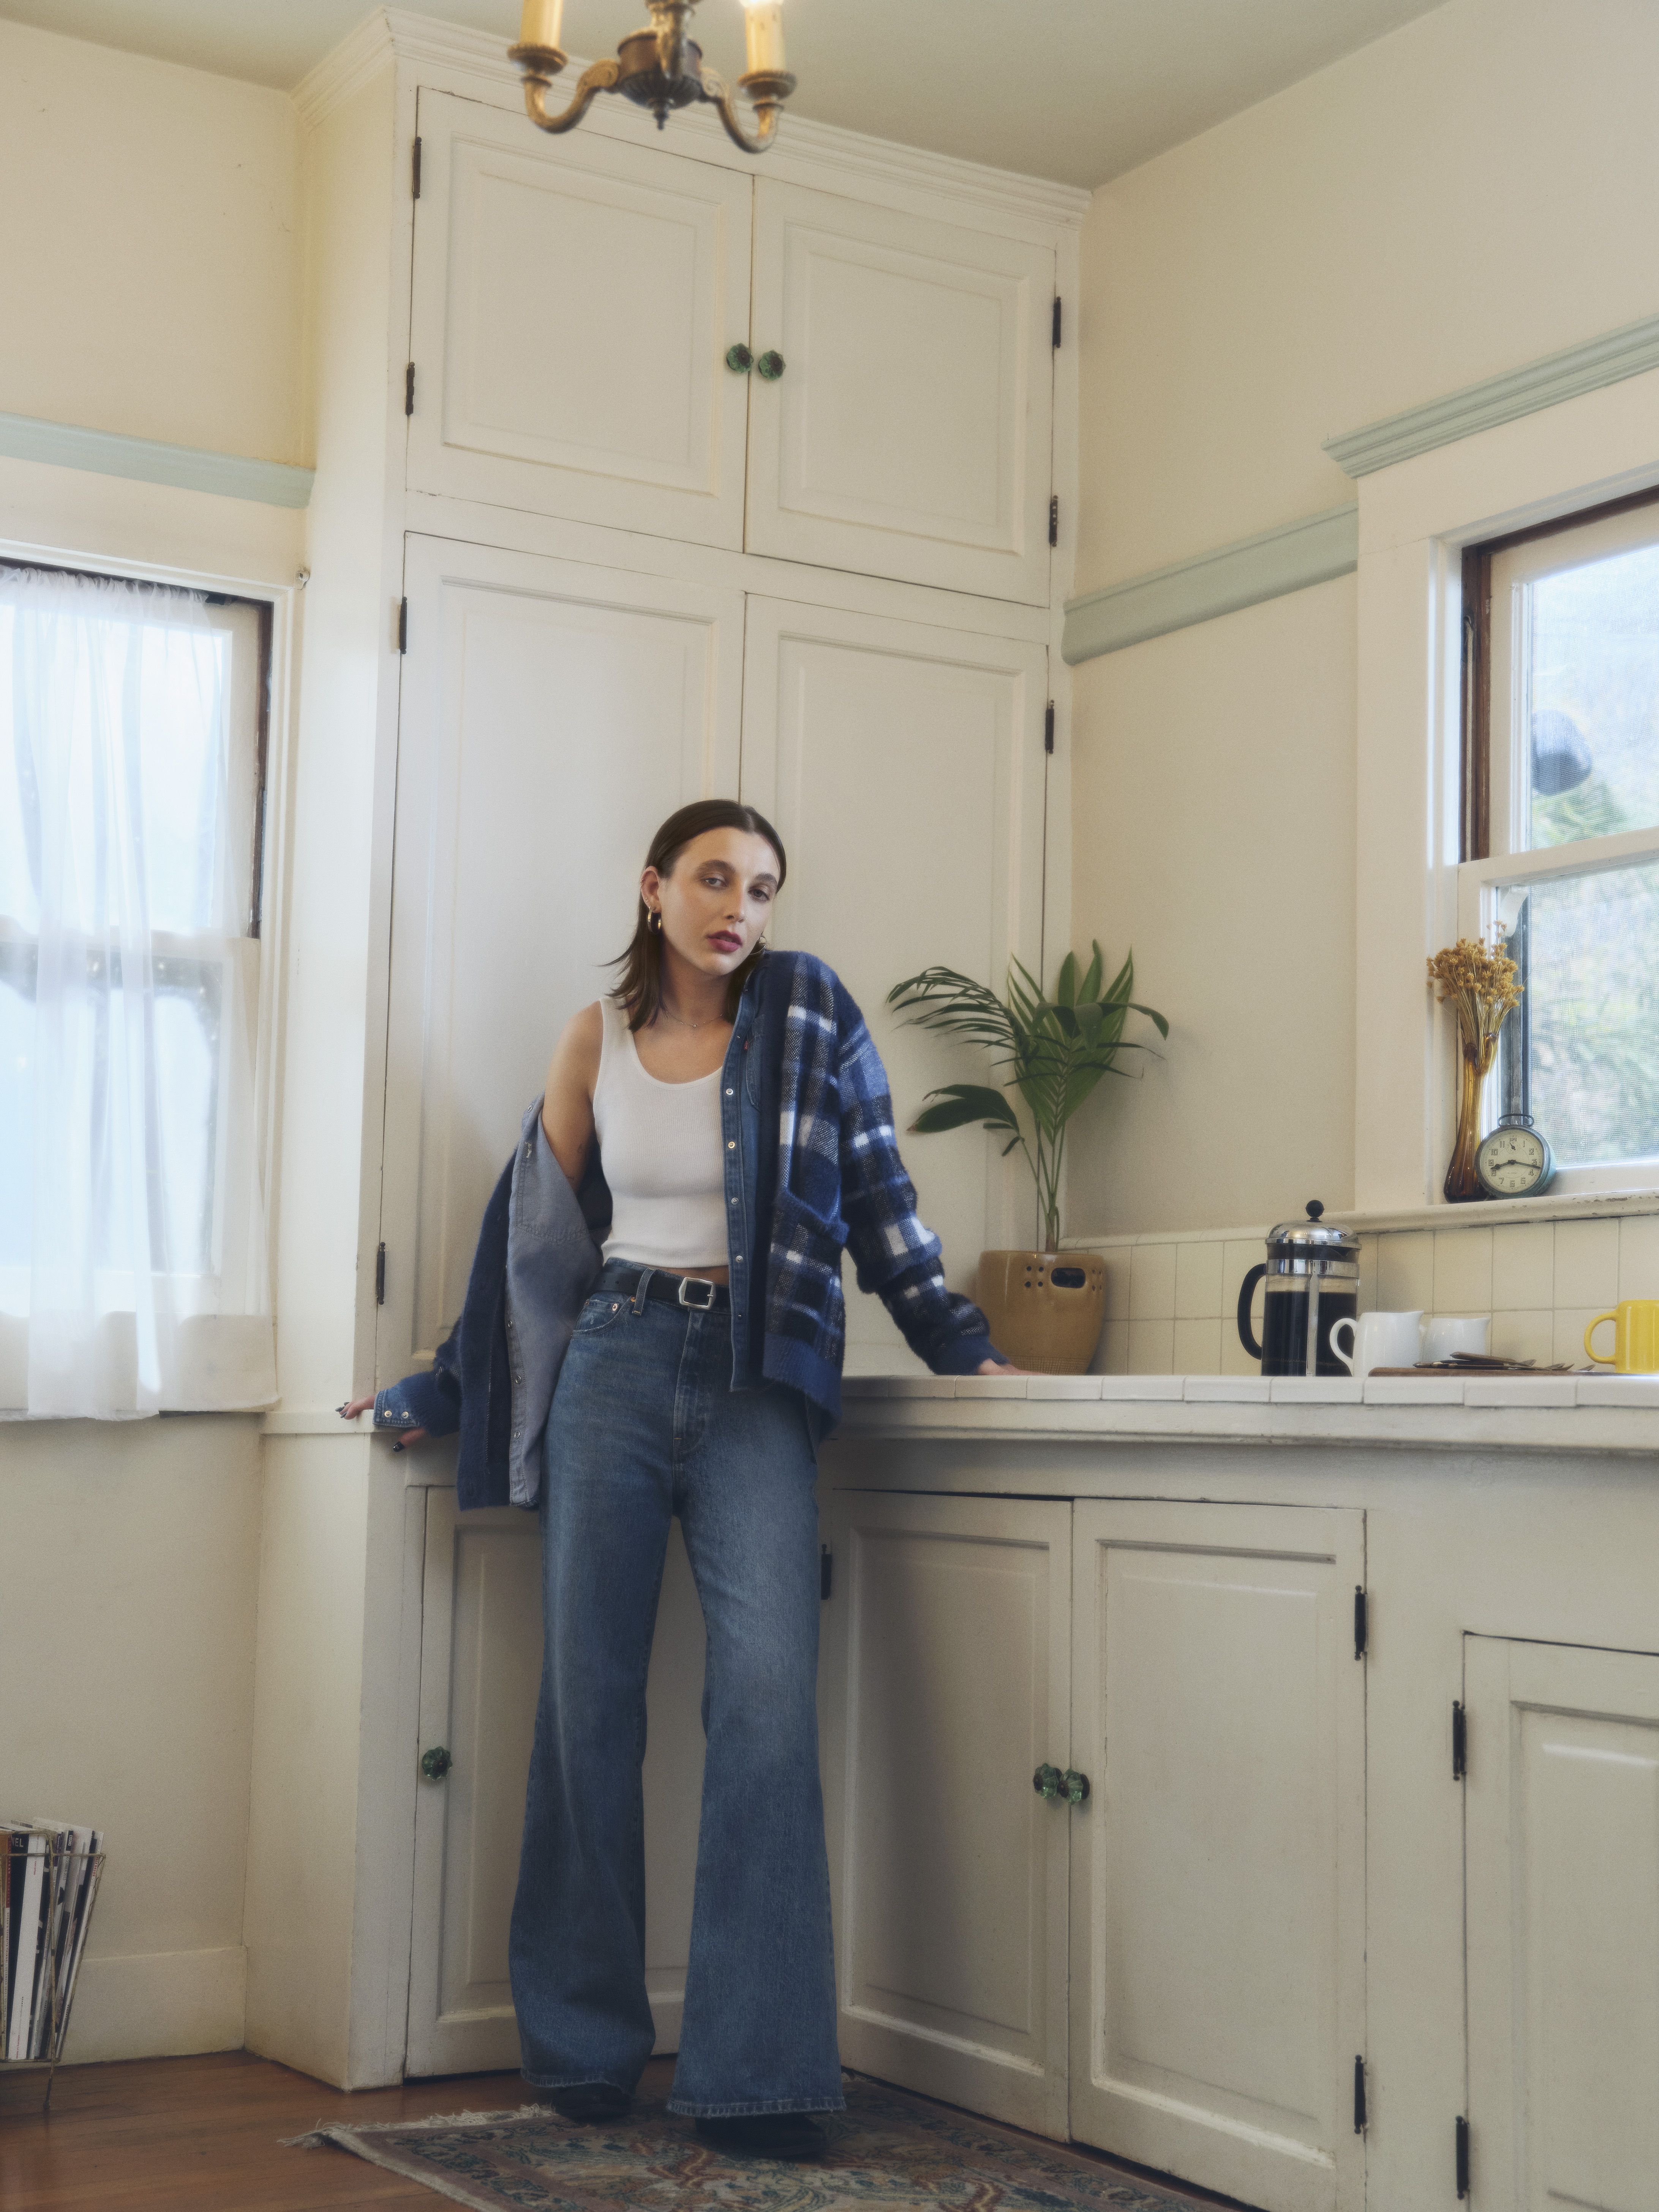 Shop for Vintage Levi's Jeans With Emma Chamberlain